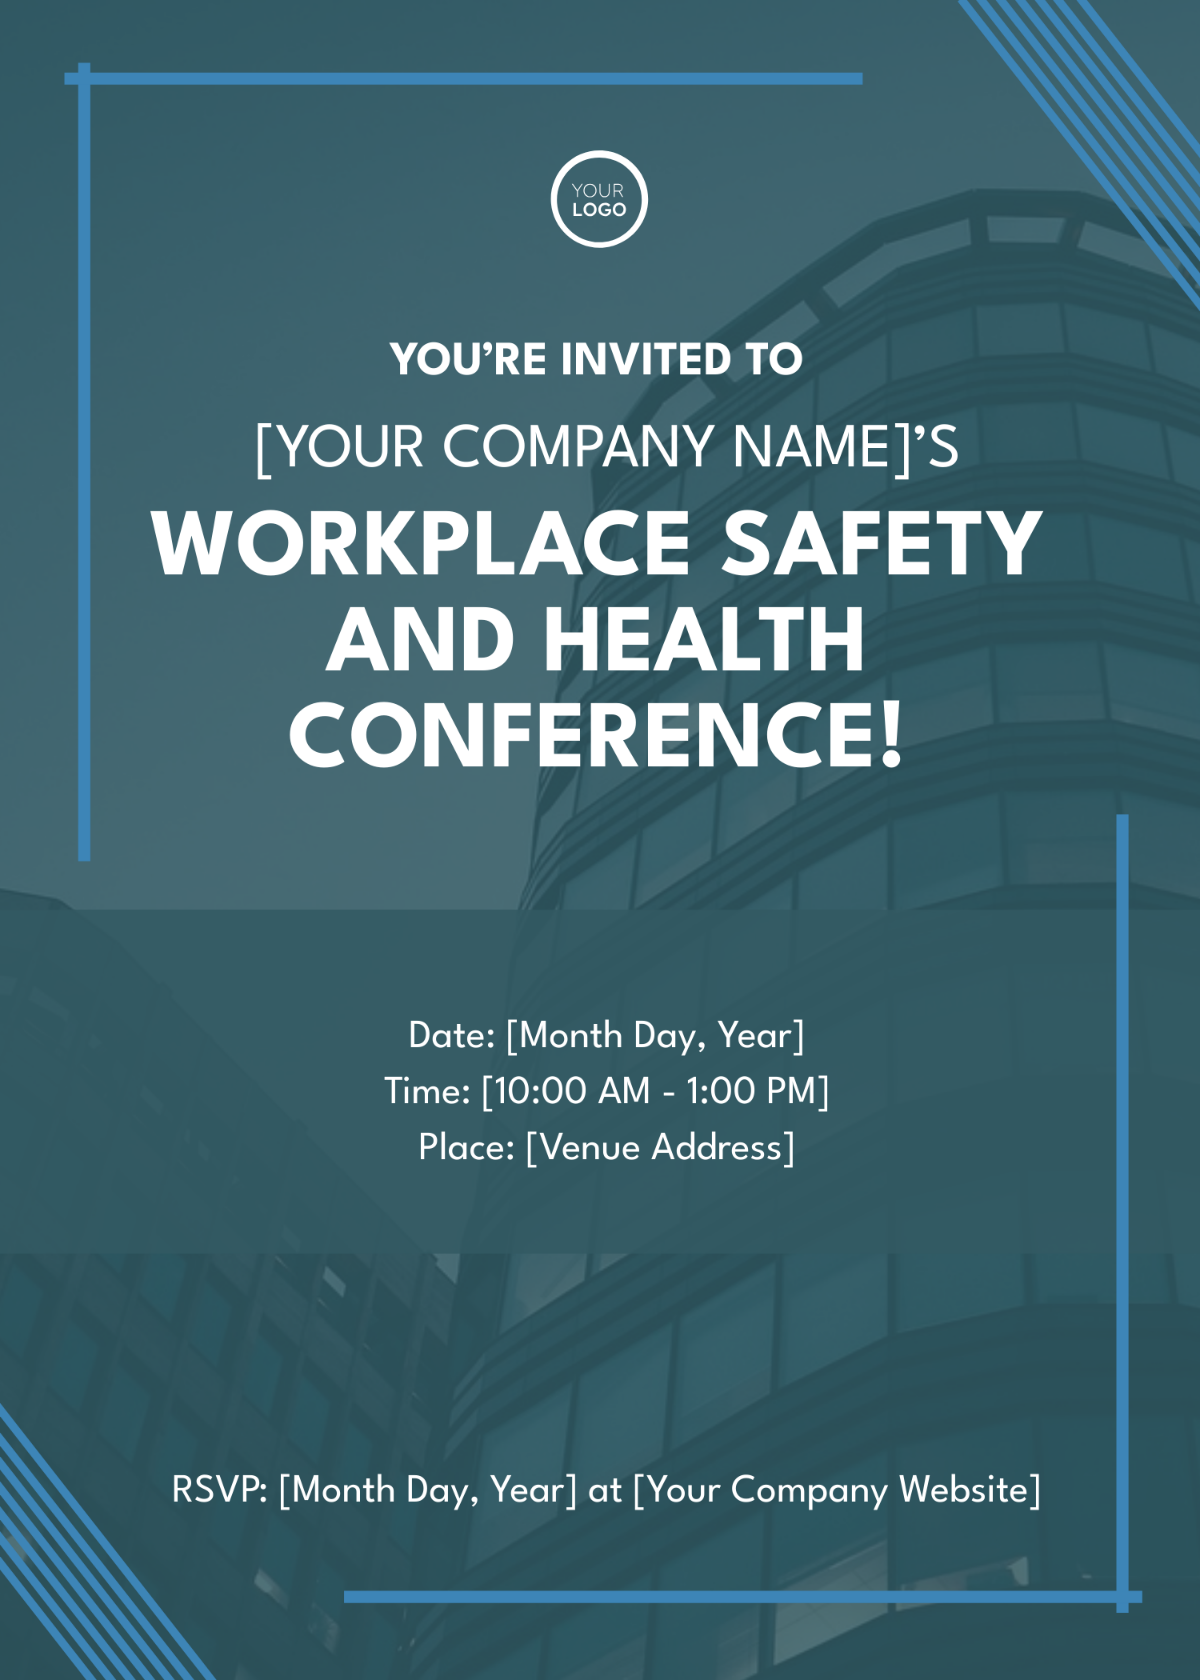 Free Workplace Safety and Health Conference Invitation Card Template